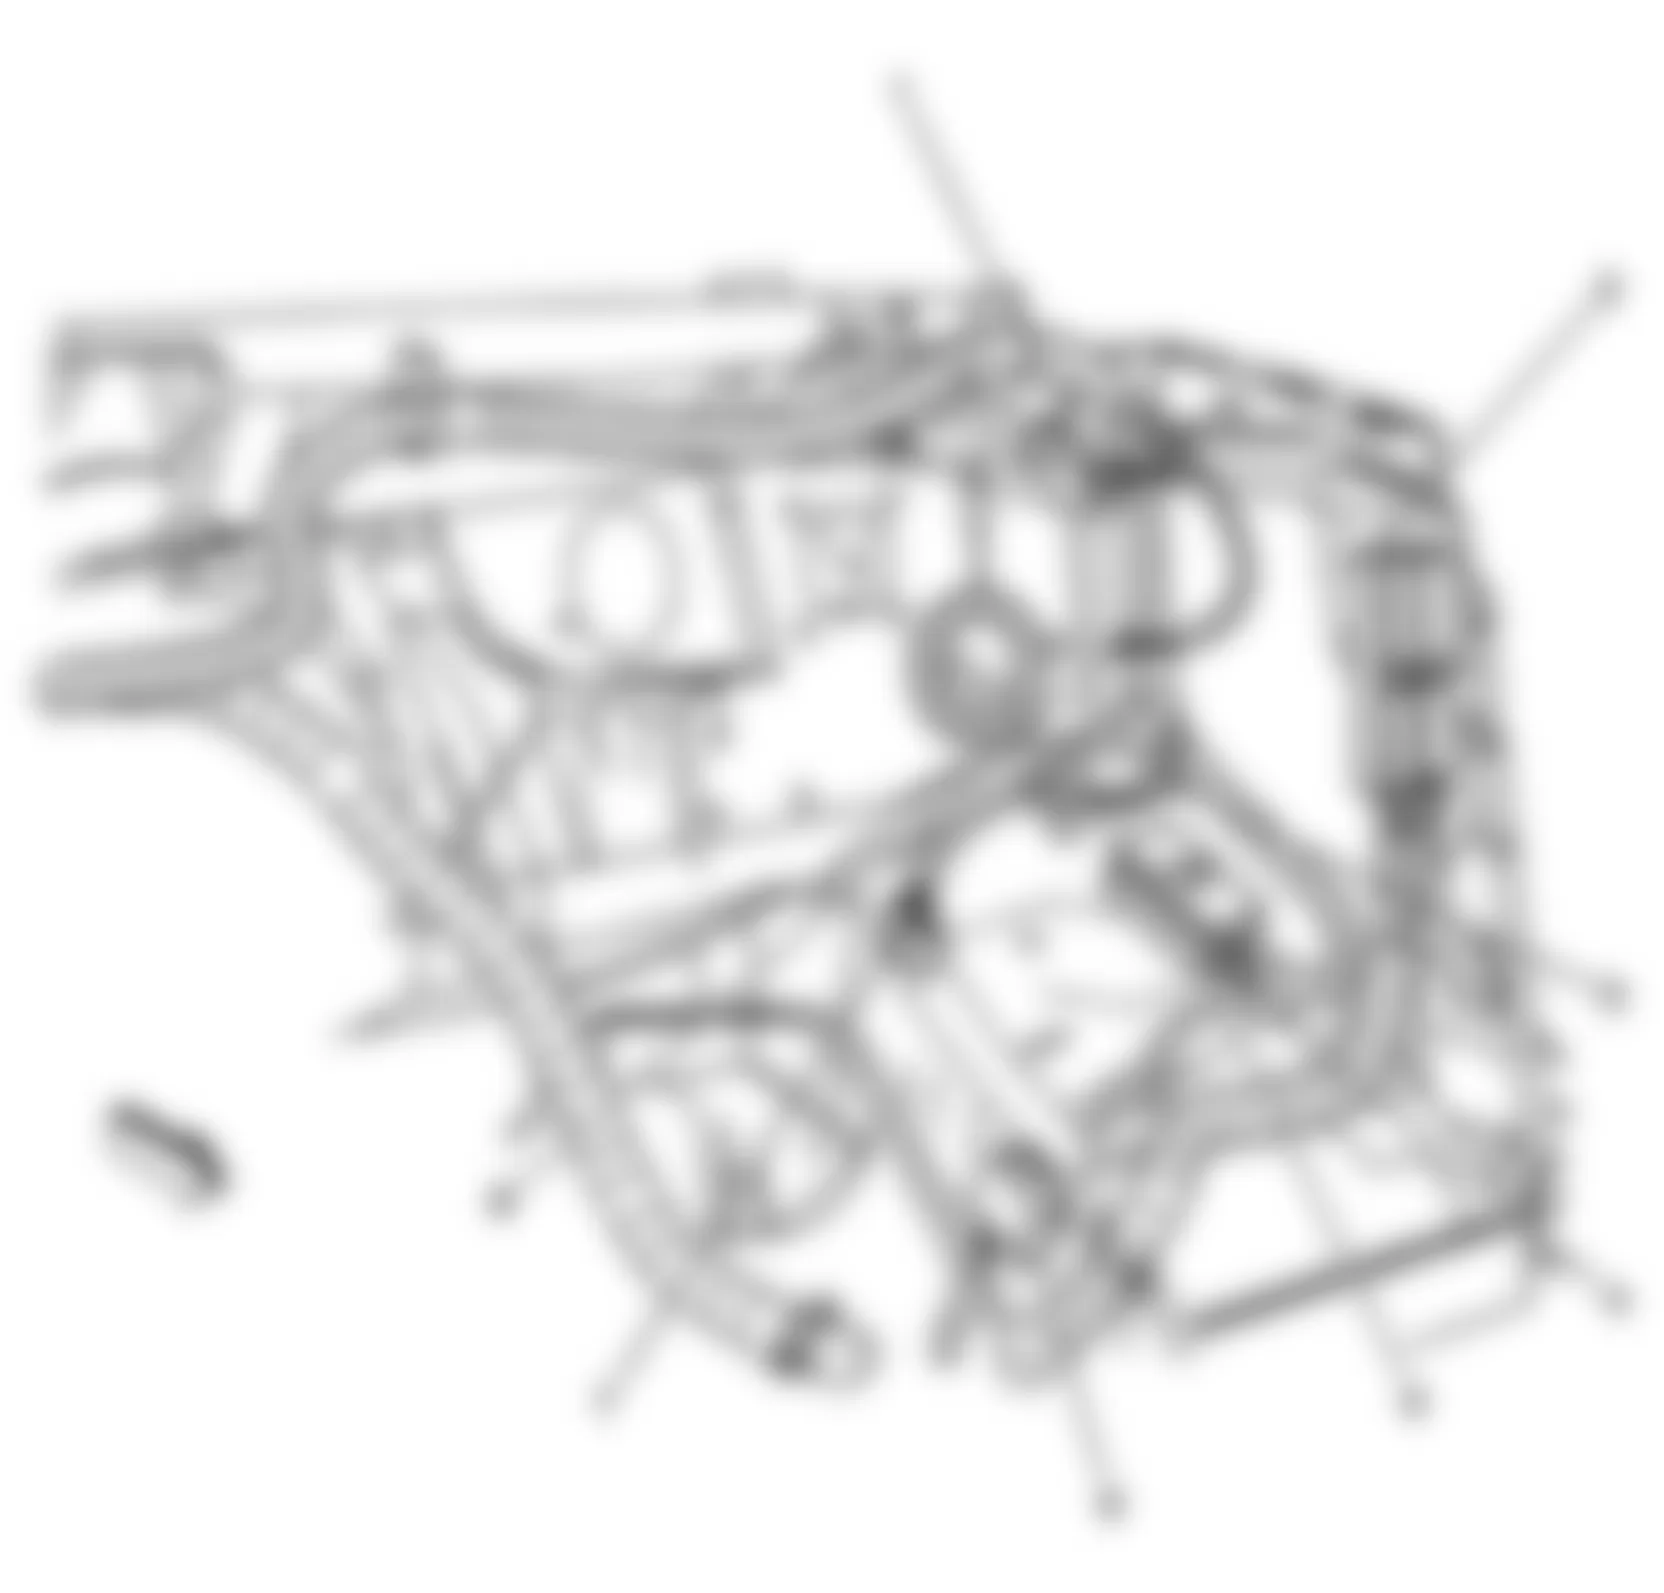 GMC Savana H1500 2008 - Component Locations -  Left Rear Of Engine Compartment